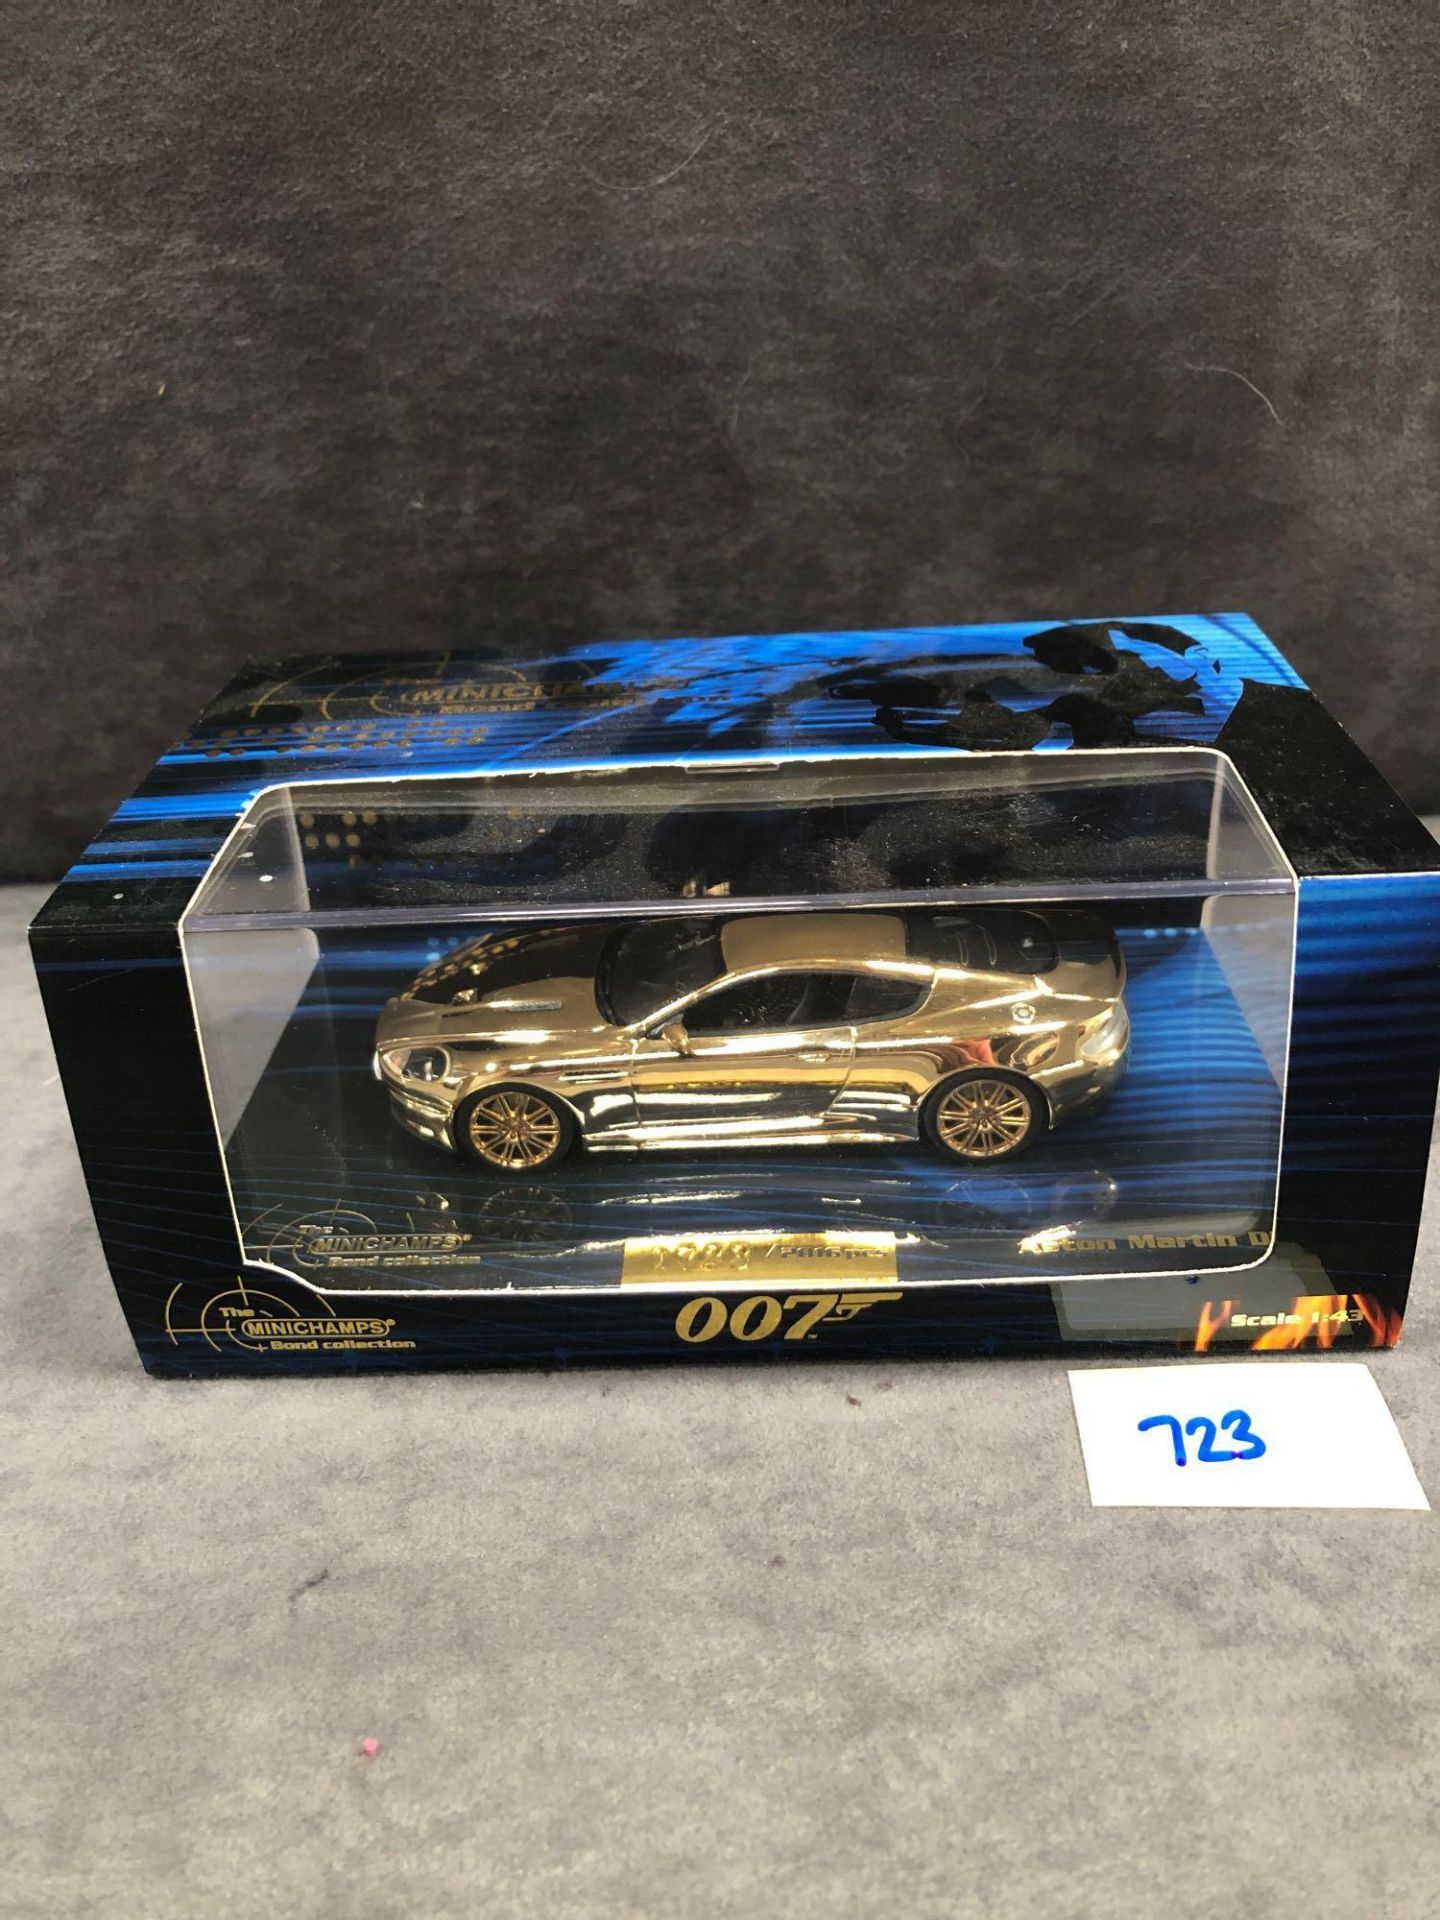 Minichamps Bond Collection Aston Martin DBS In Gold Plated Limited Edition 0723/2016 Pieces